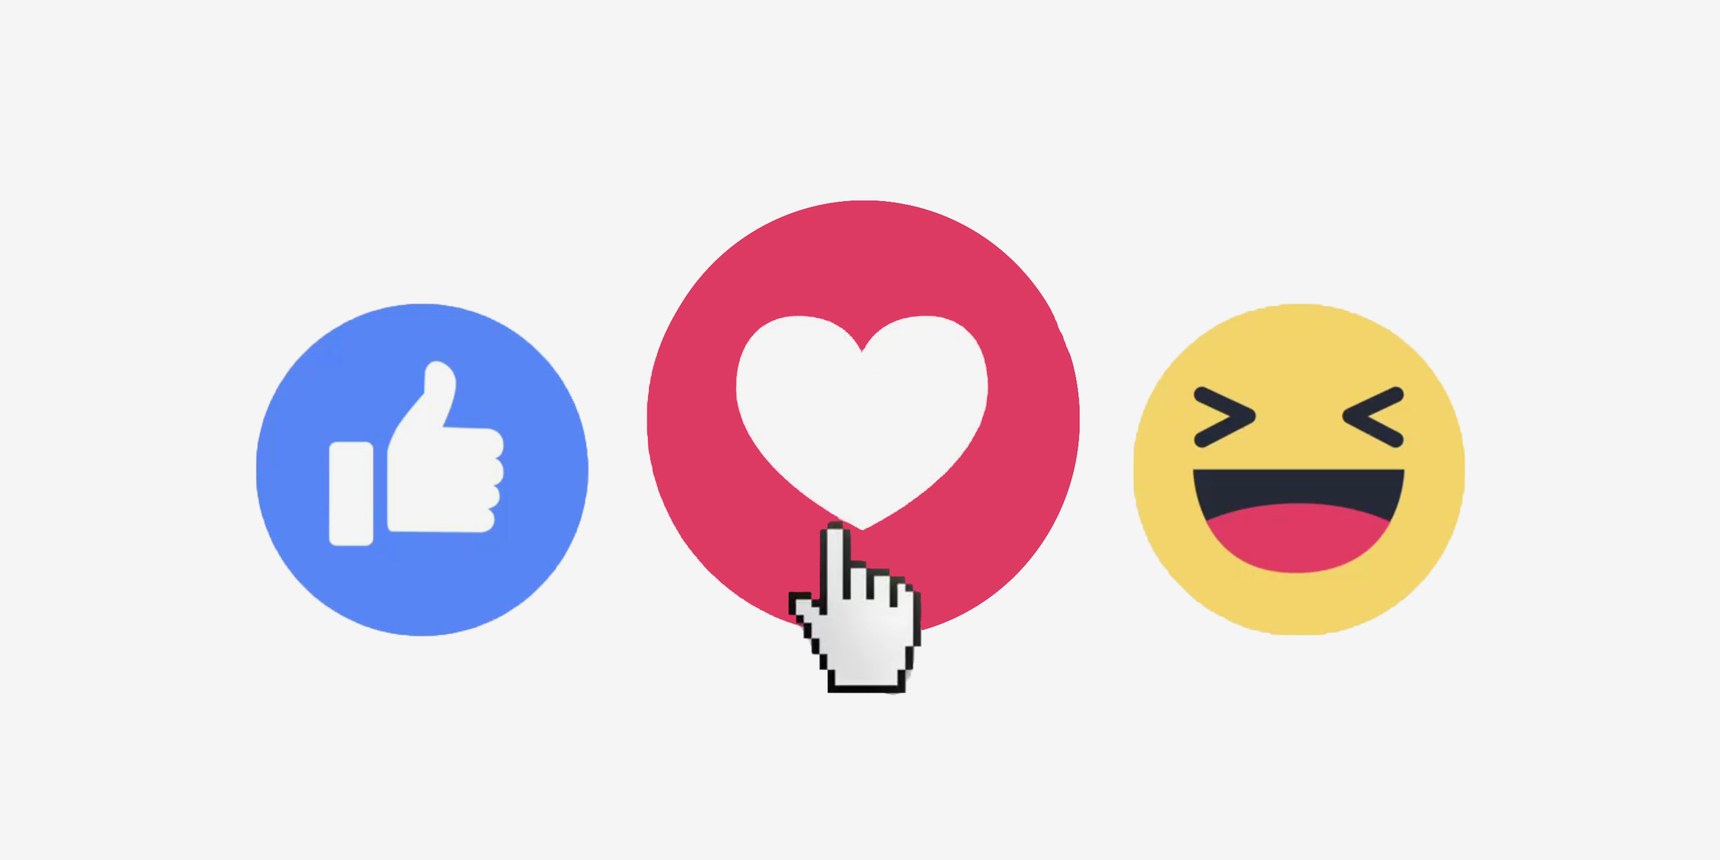 Thumb up to like on Facebook Icons | Free Download